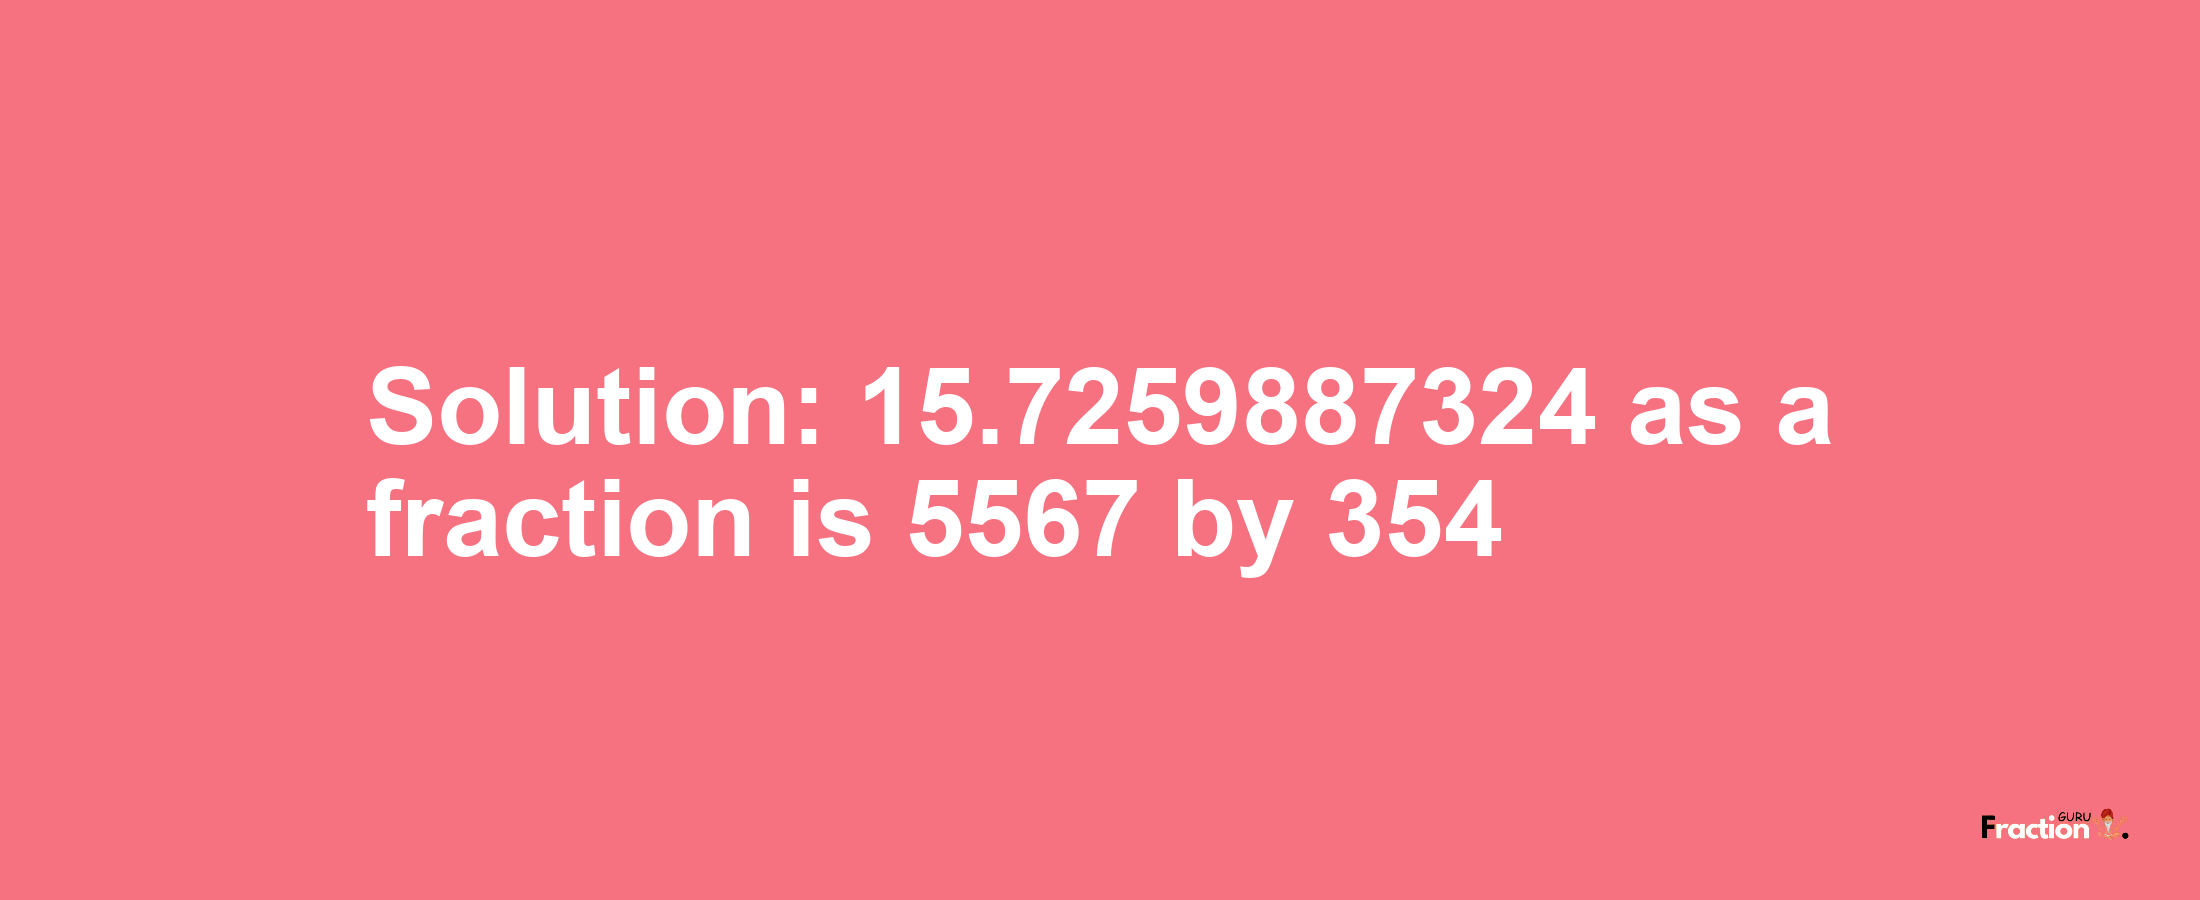 Solution:15.7259887324 as a fraction is 5567/354